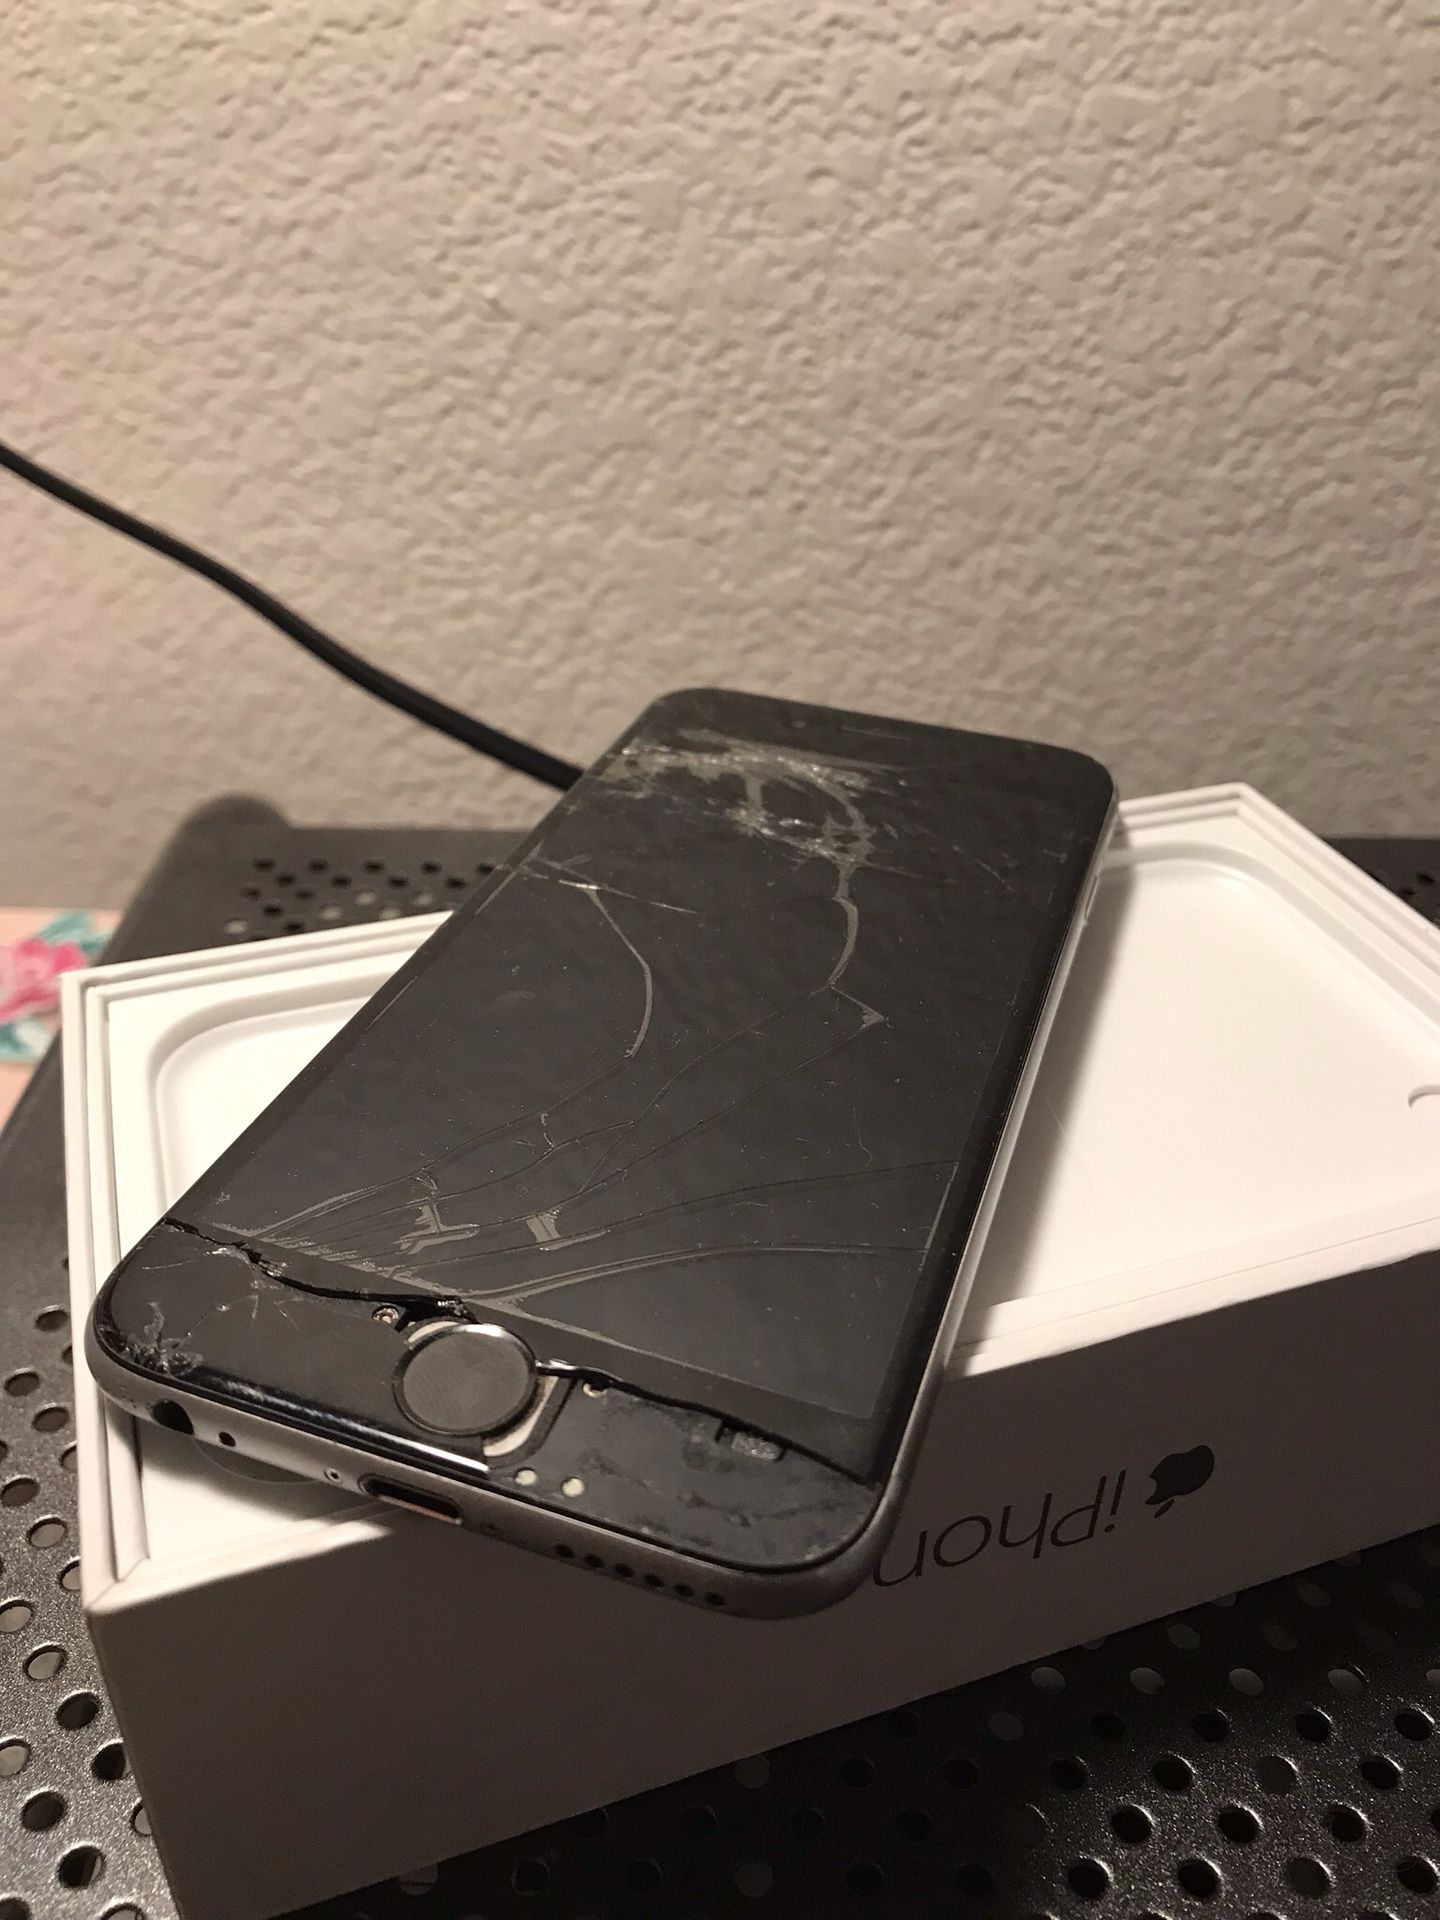 iPhone 6 screen cracked still works great though.